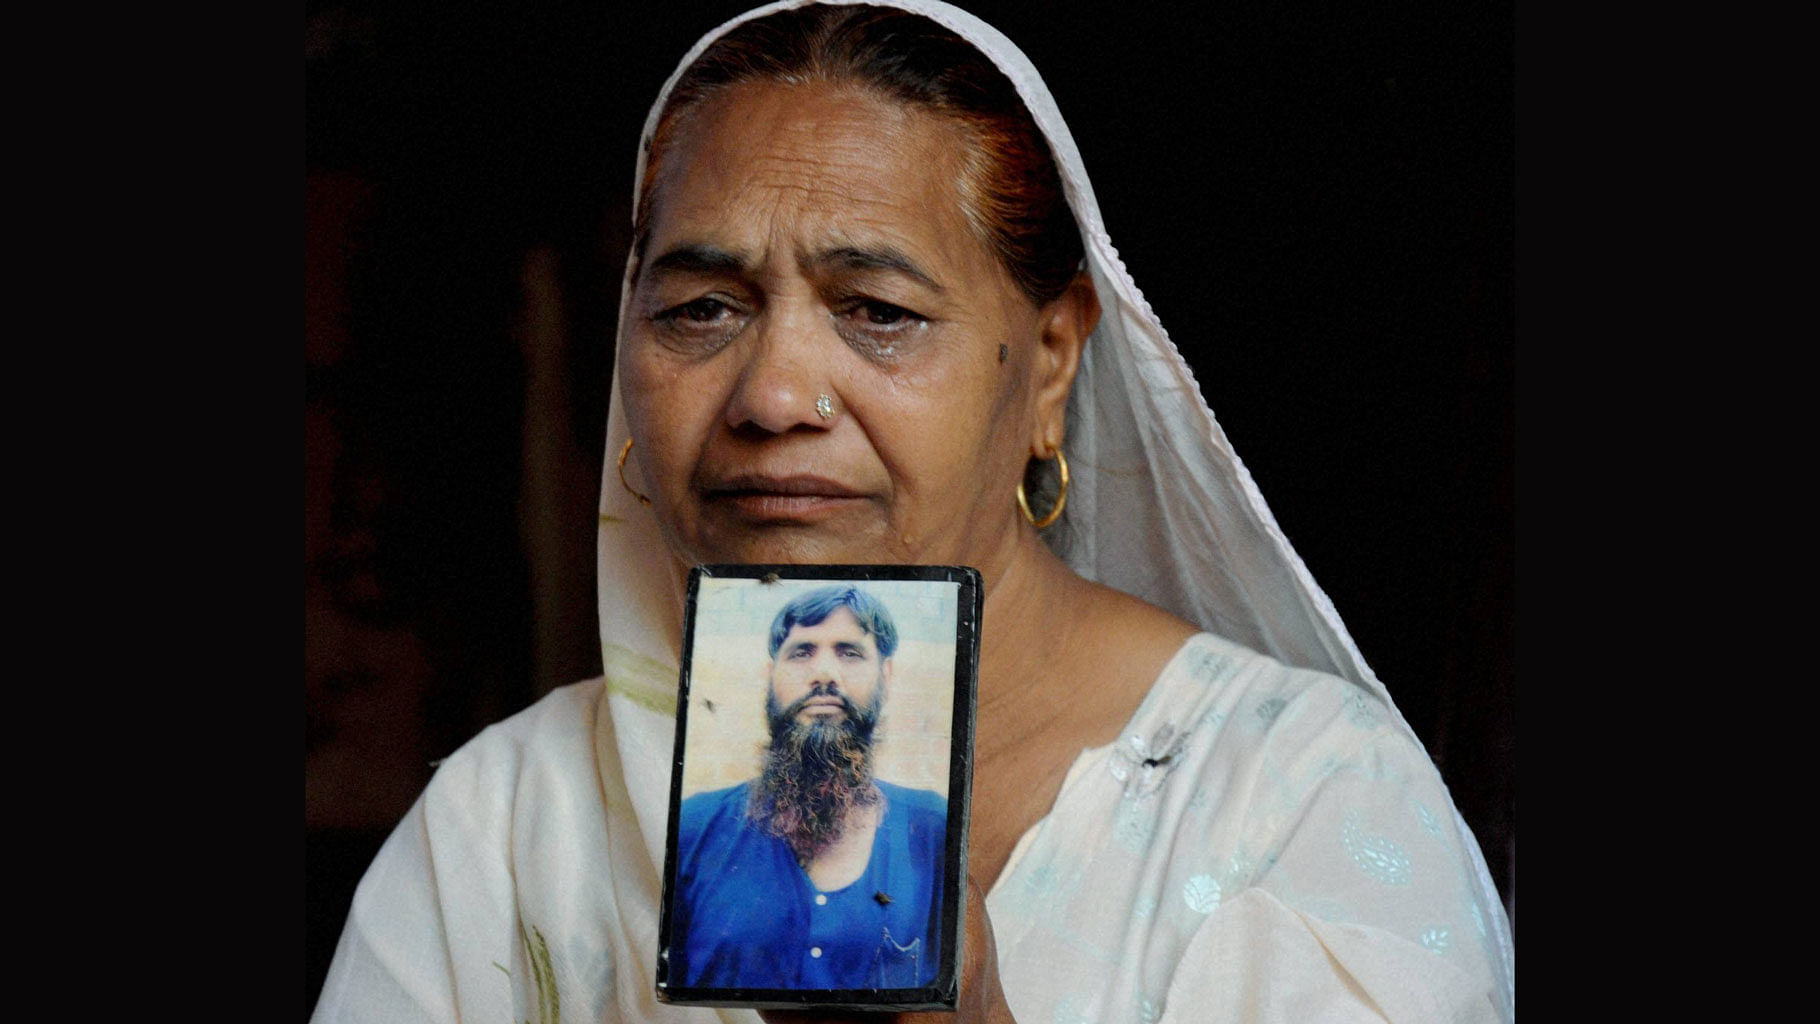 Jagir Kaur,  Kirpal Singh’s sister cries as she shows his photograph while mourning the news of his death, in Amritsar, on Tuesday. (Photo: PTI)